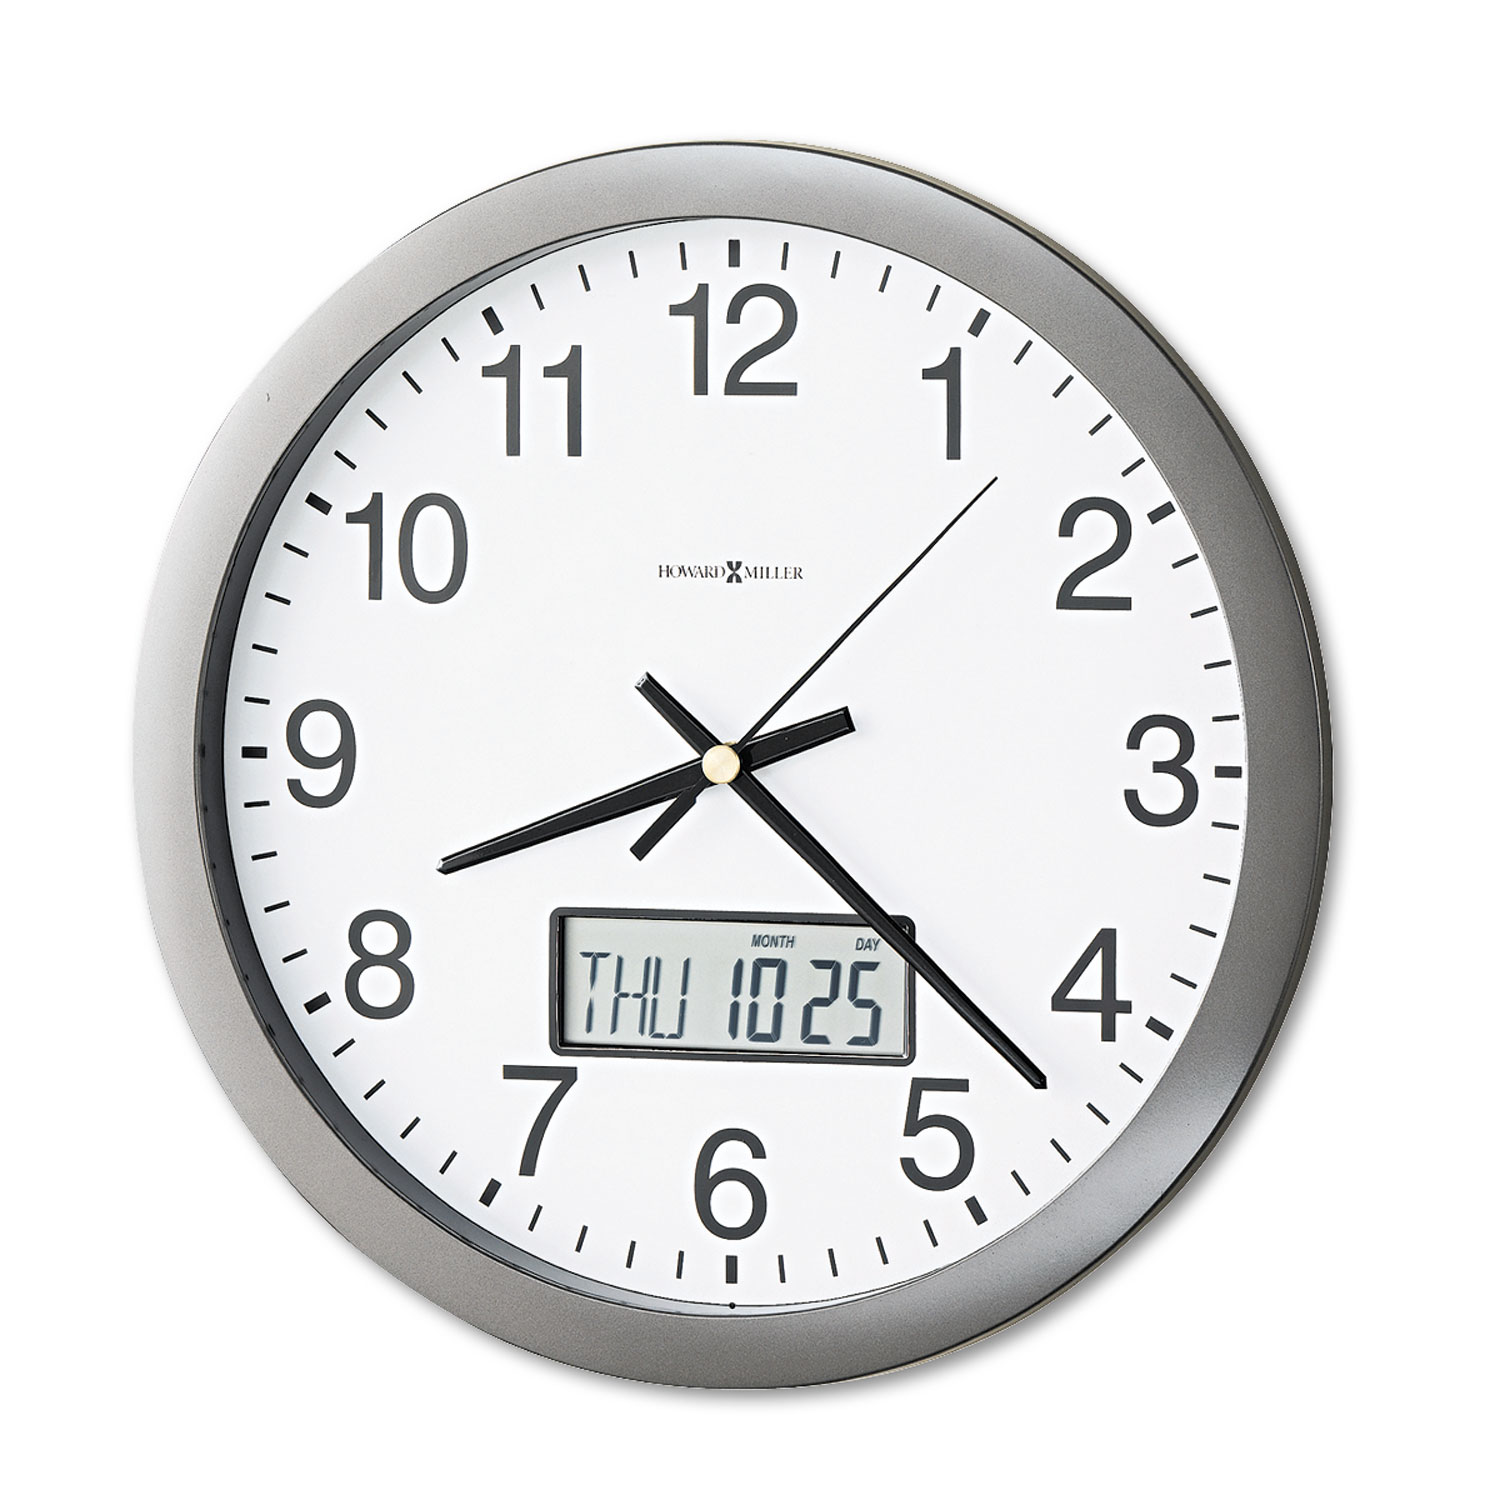 Chronicle Wall Clock with LCD Inset, 14" Overall Diameter, Gray Case, 1 AA (sold separately)